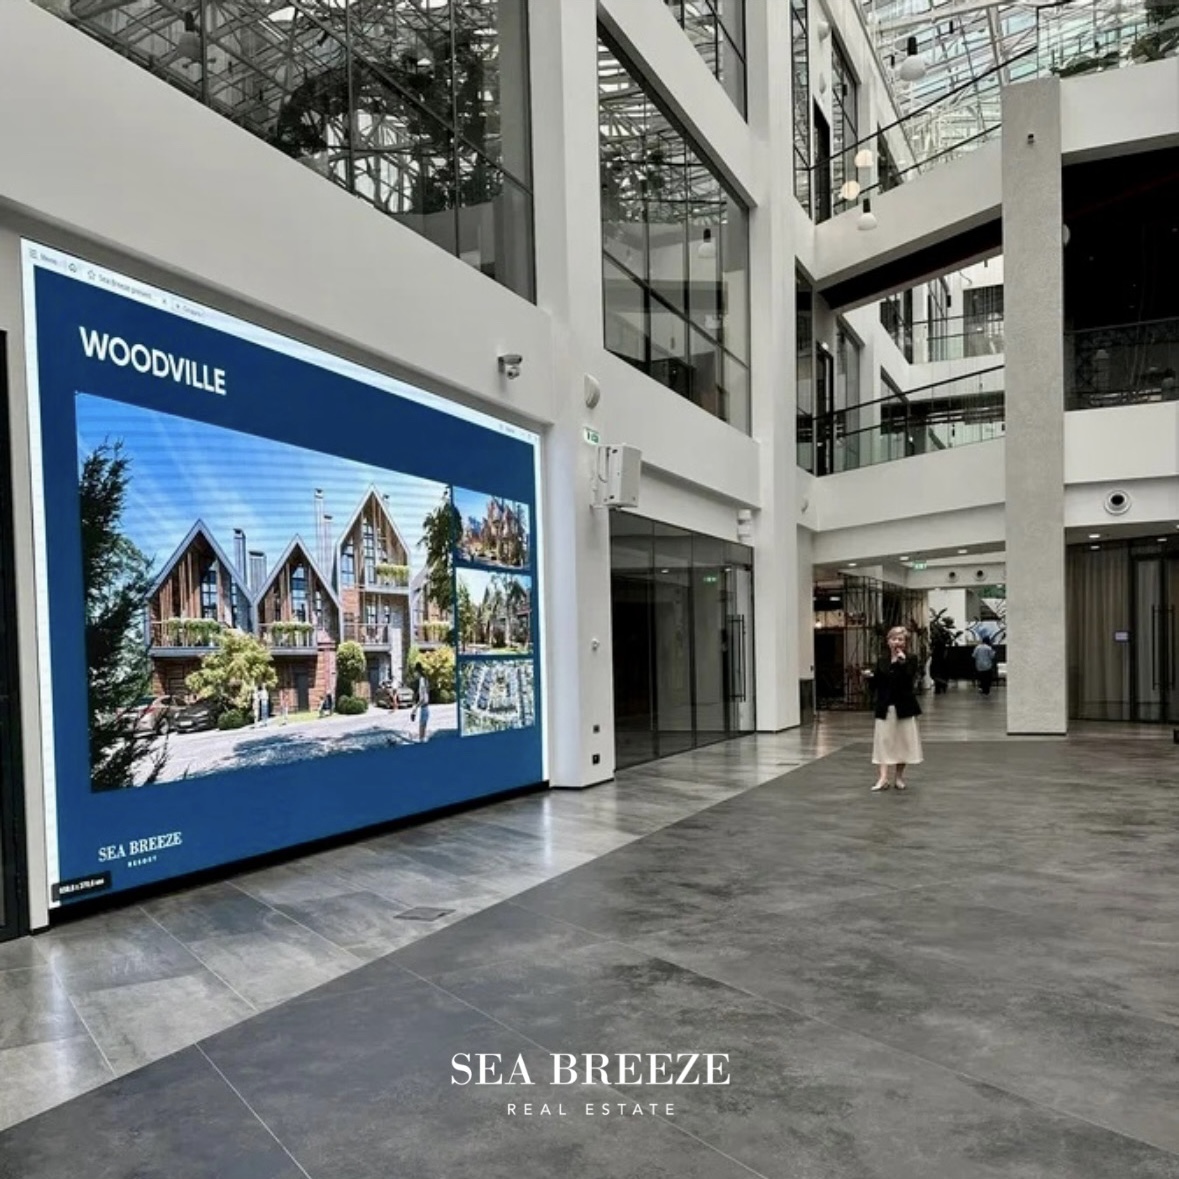 Sea Breeze took part in the presentation of foreign real estate projects